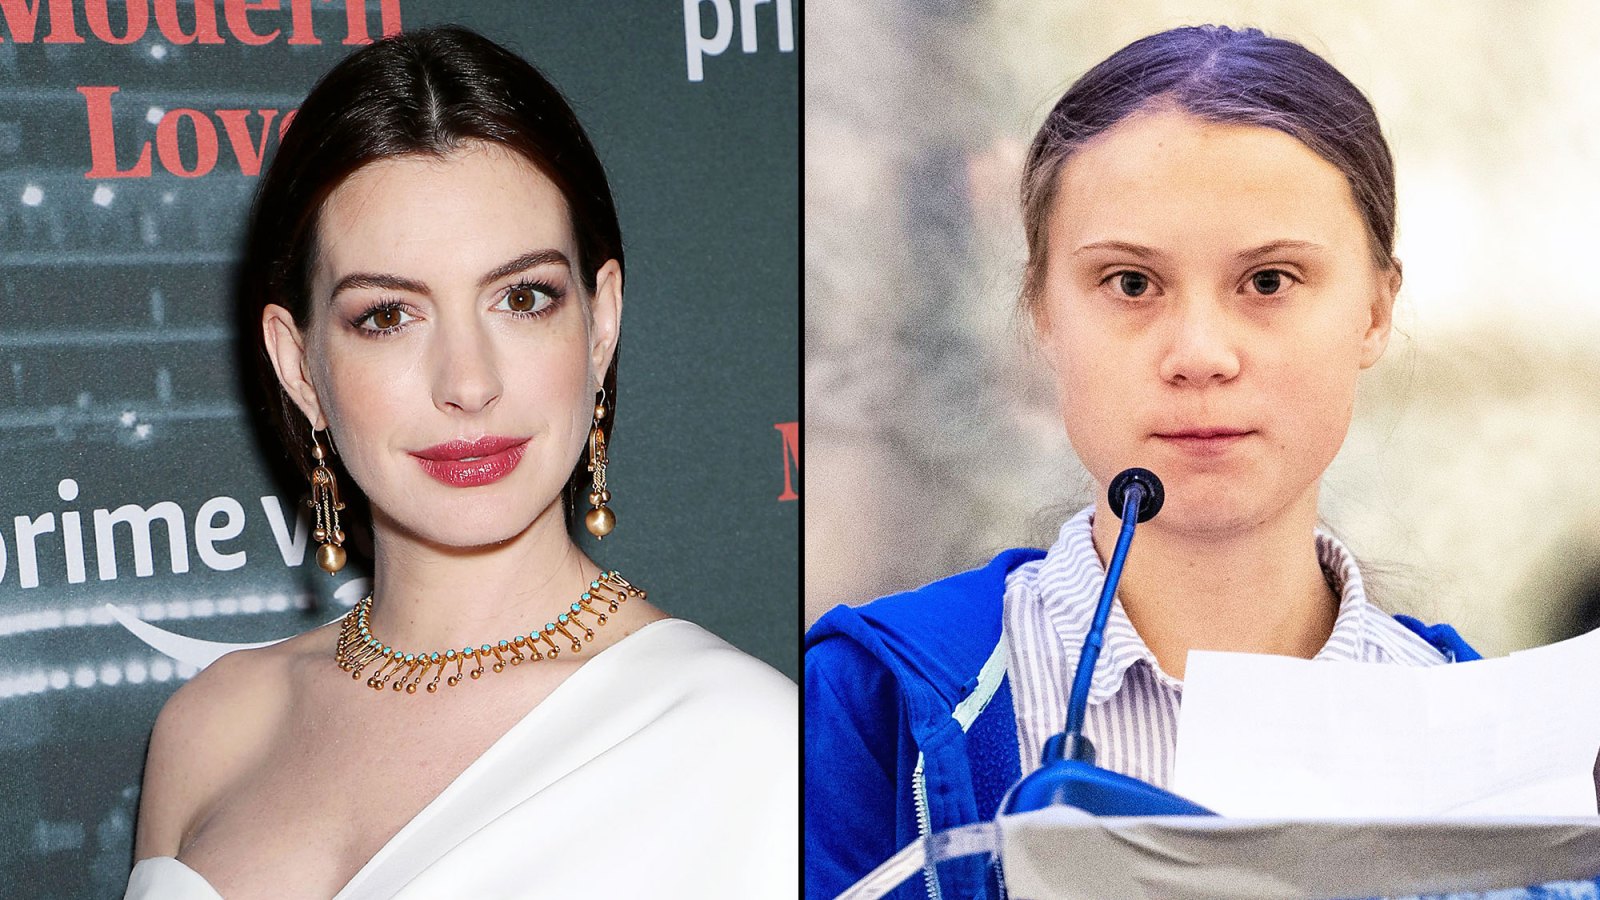 Anne Hathaway Explains Why She Defended Teen Activist Greta Thunberg